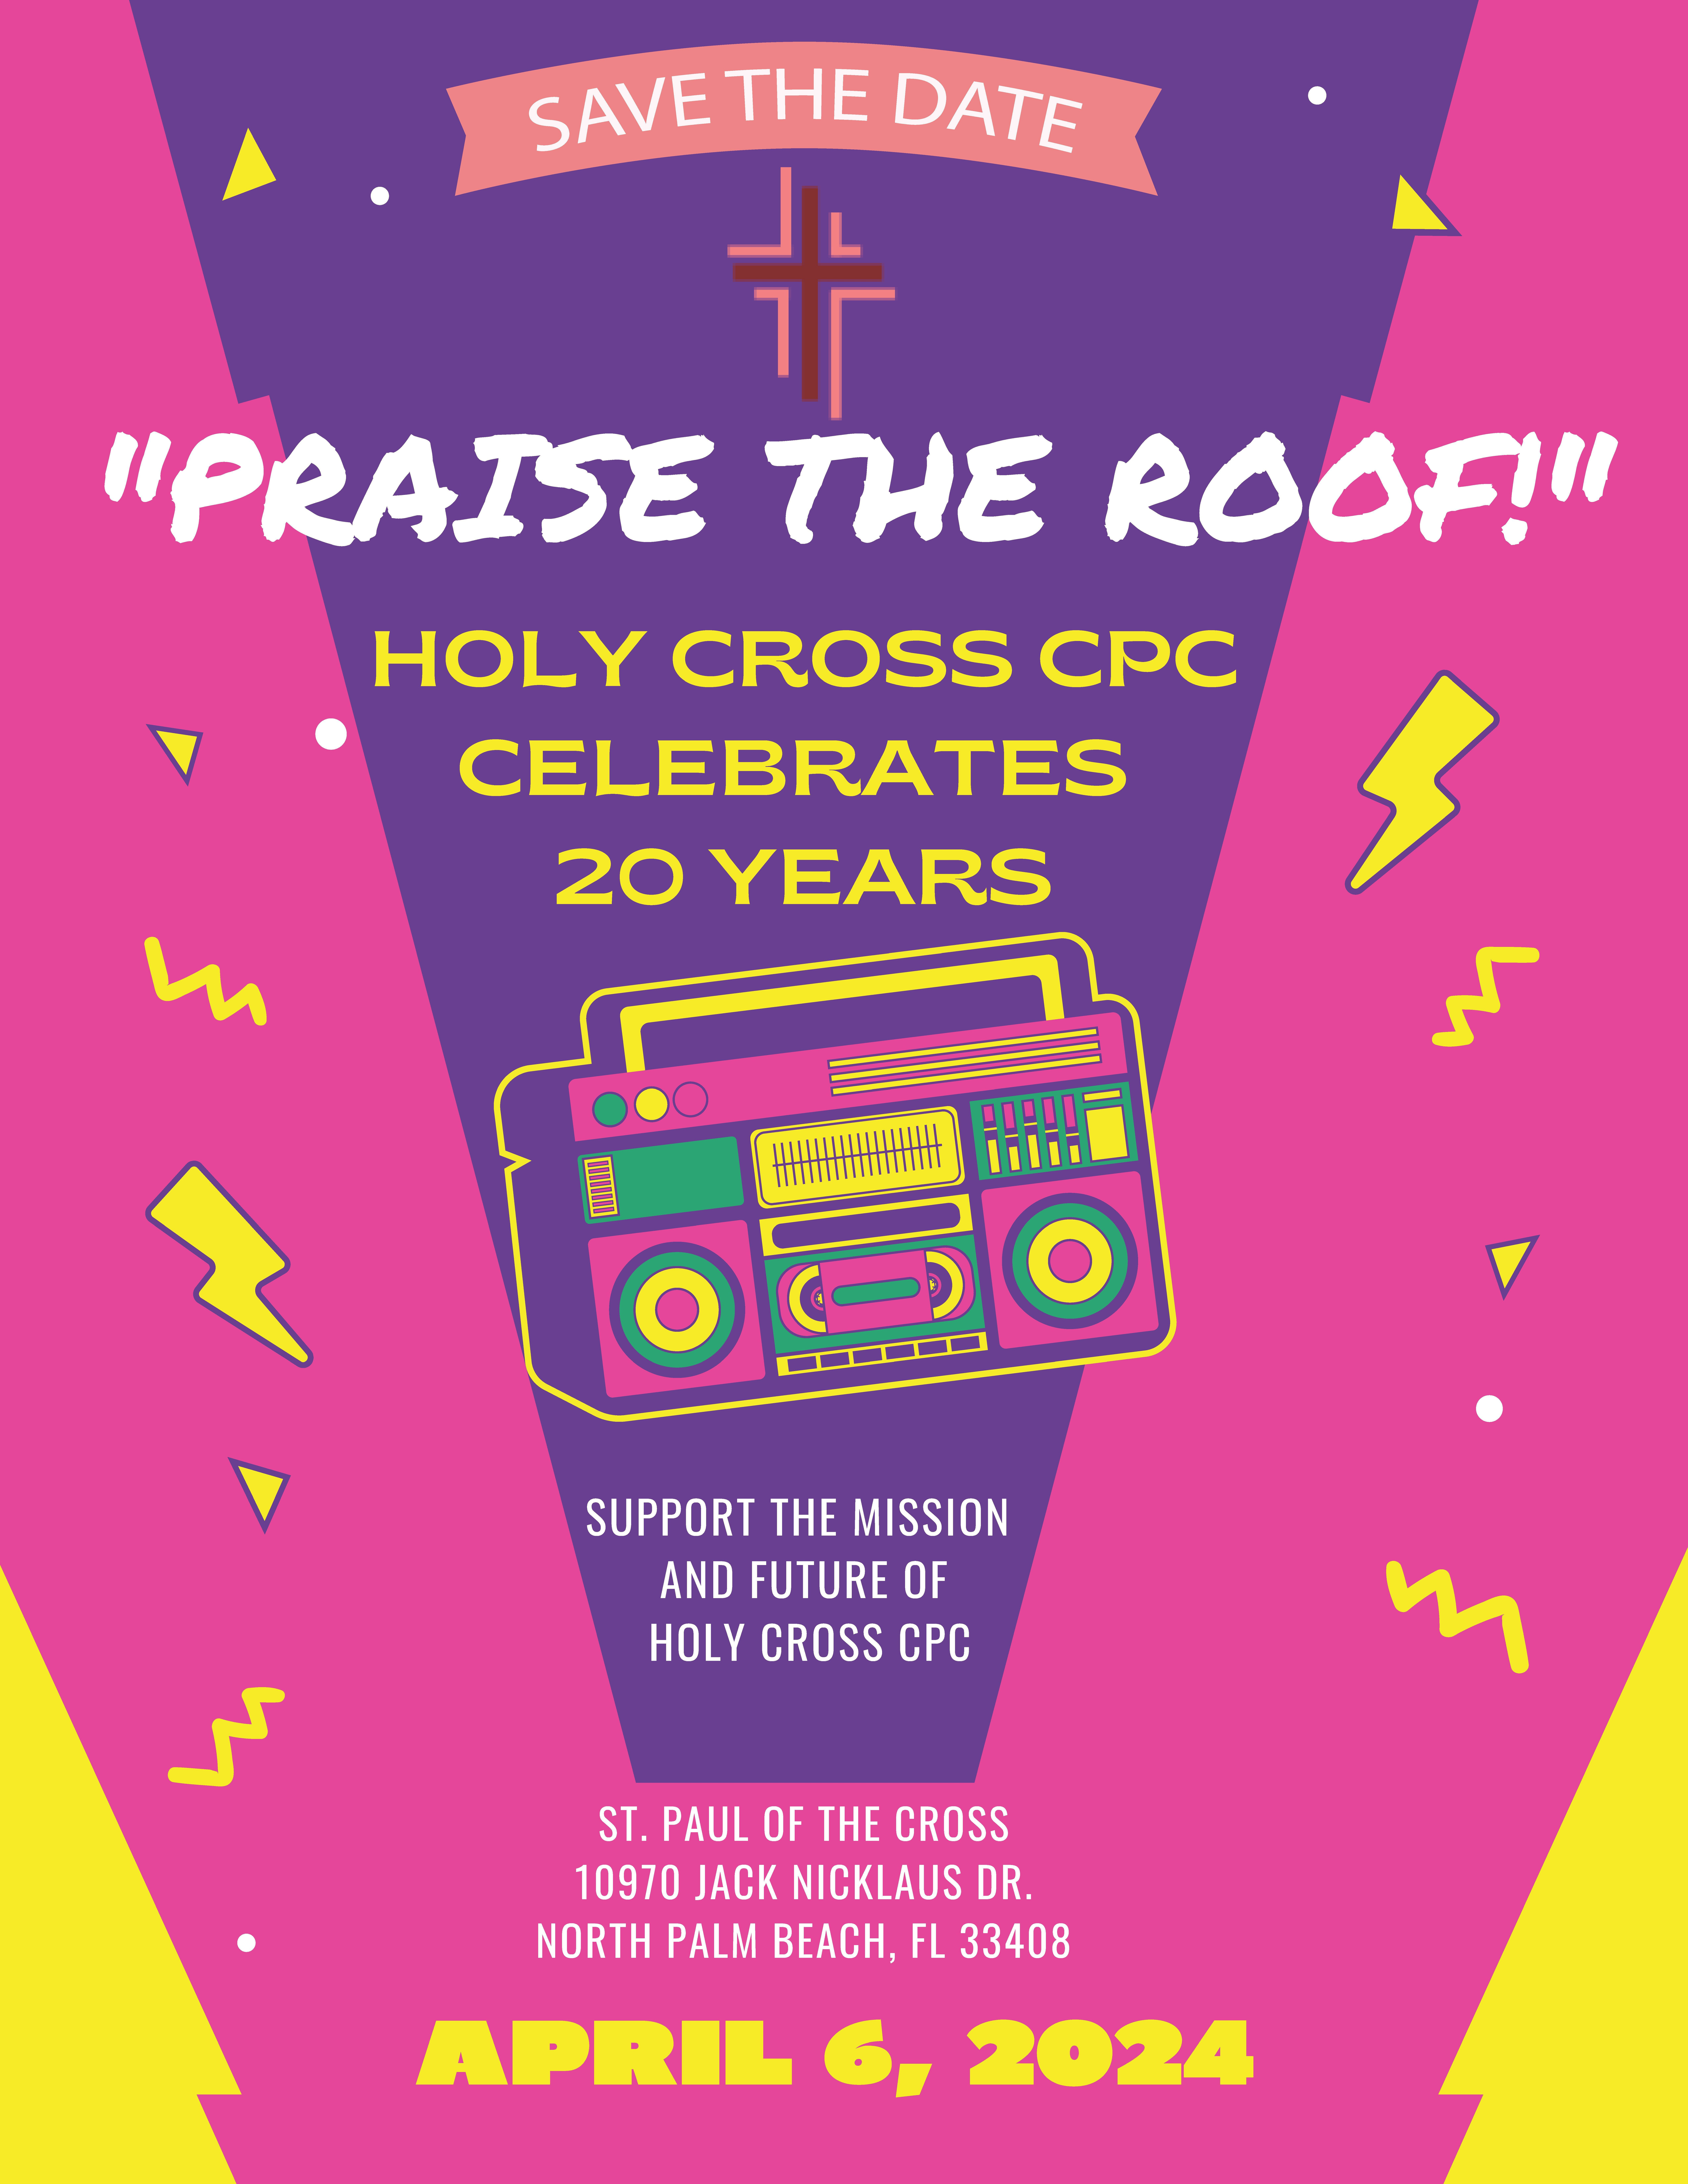 Save the Date for the Holy Cross CPC Auction